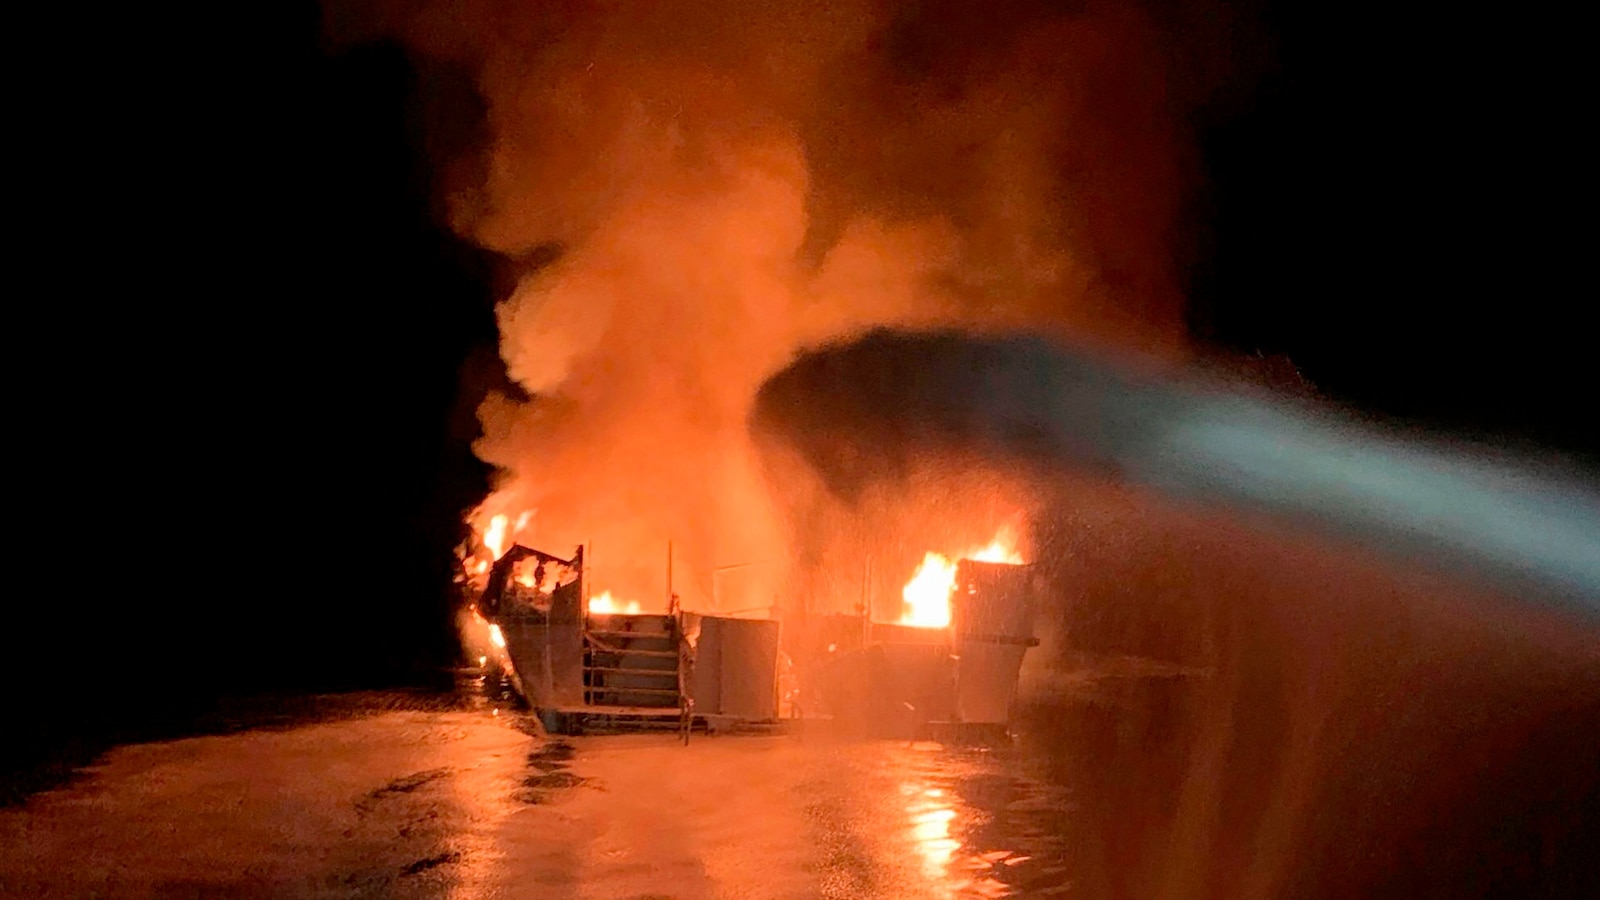 Captain sentenced to 4 years in prison for deadly boat fire [Video]